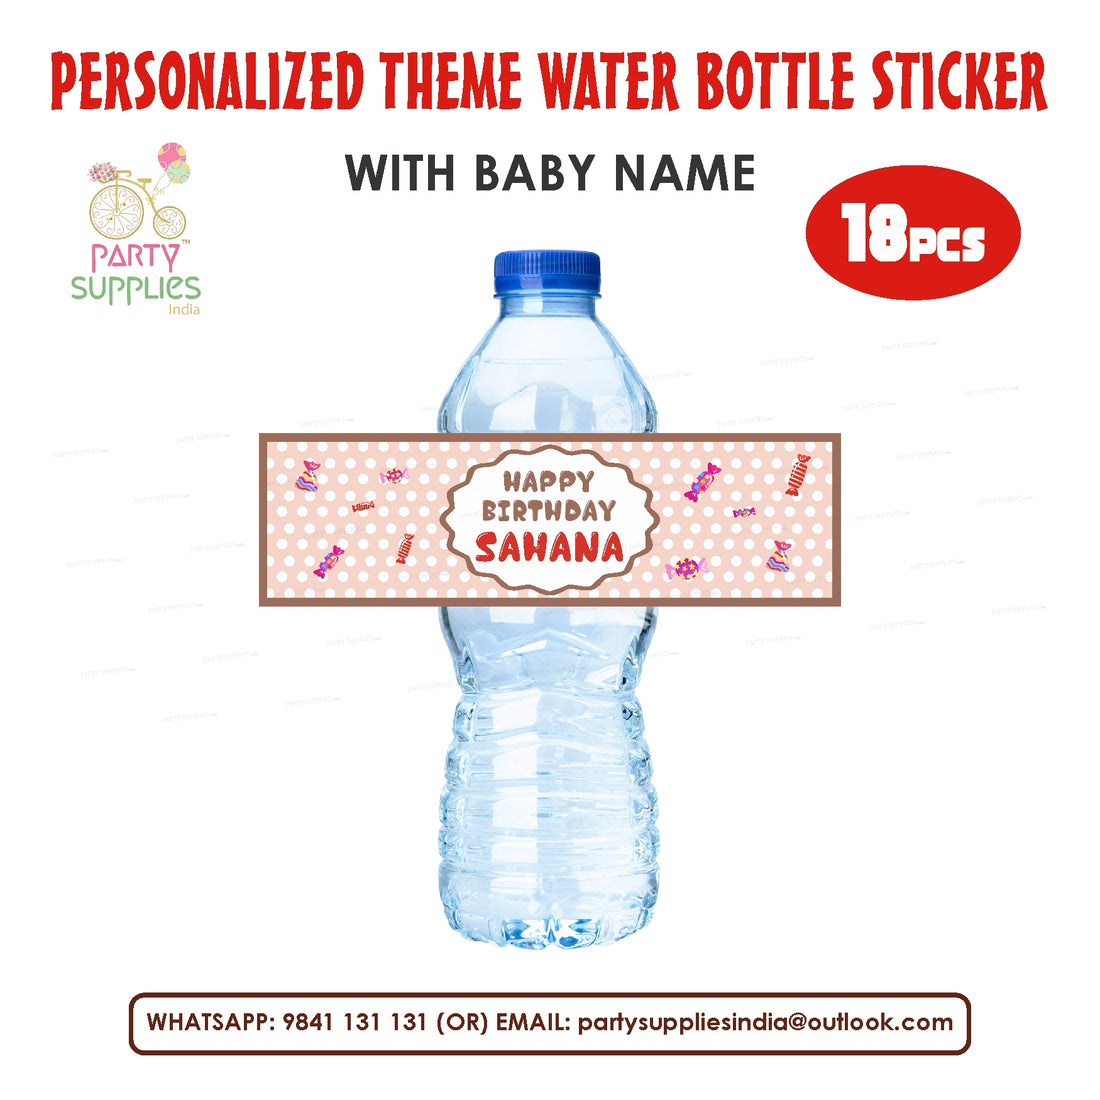 PSI Candy Theme Water Bottle Sticker